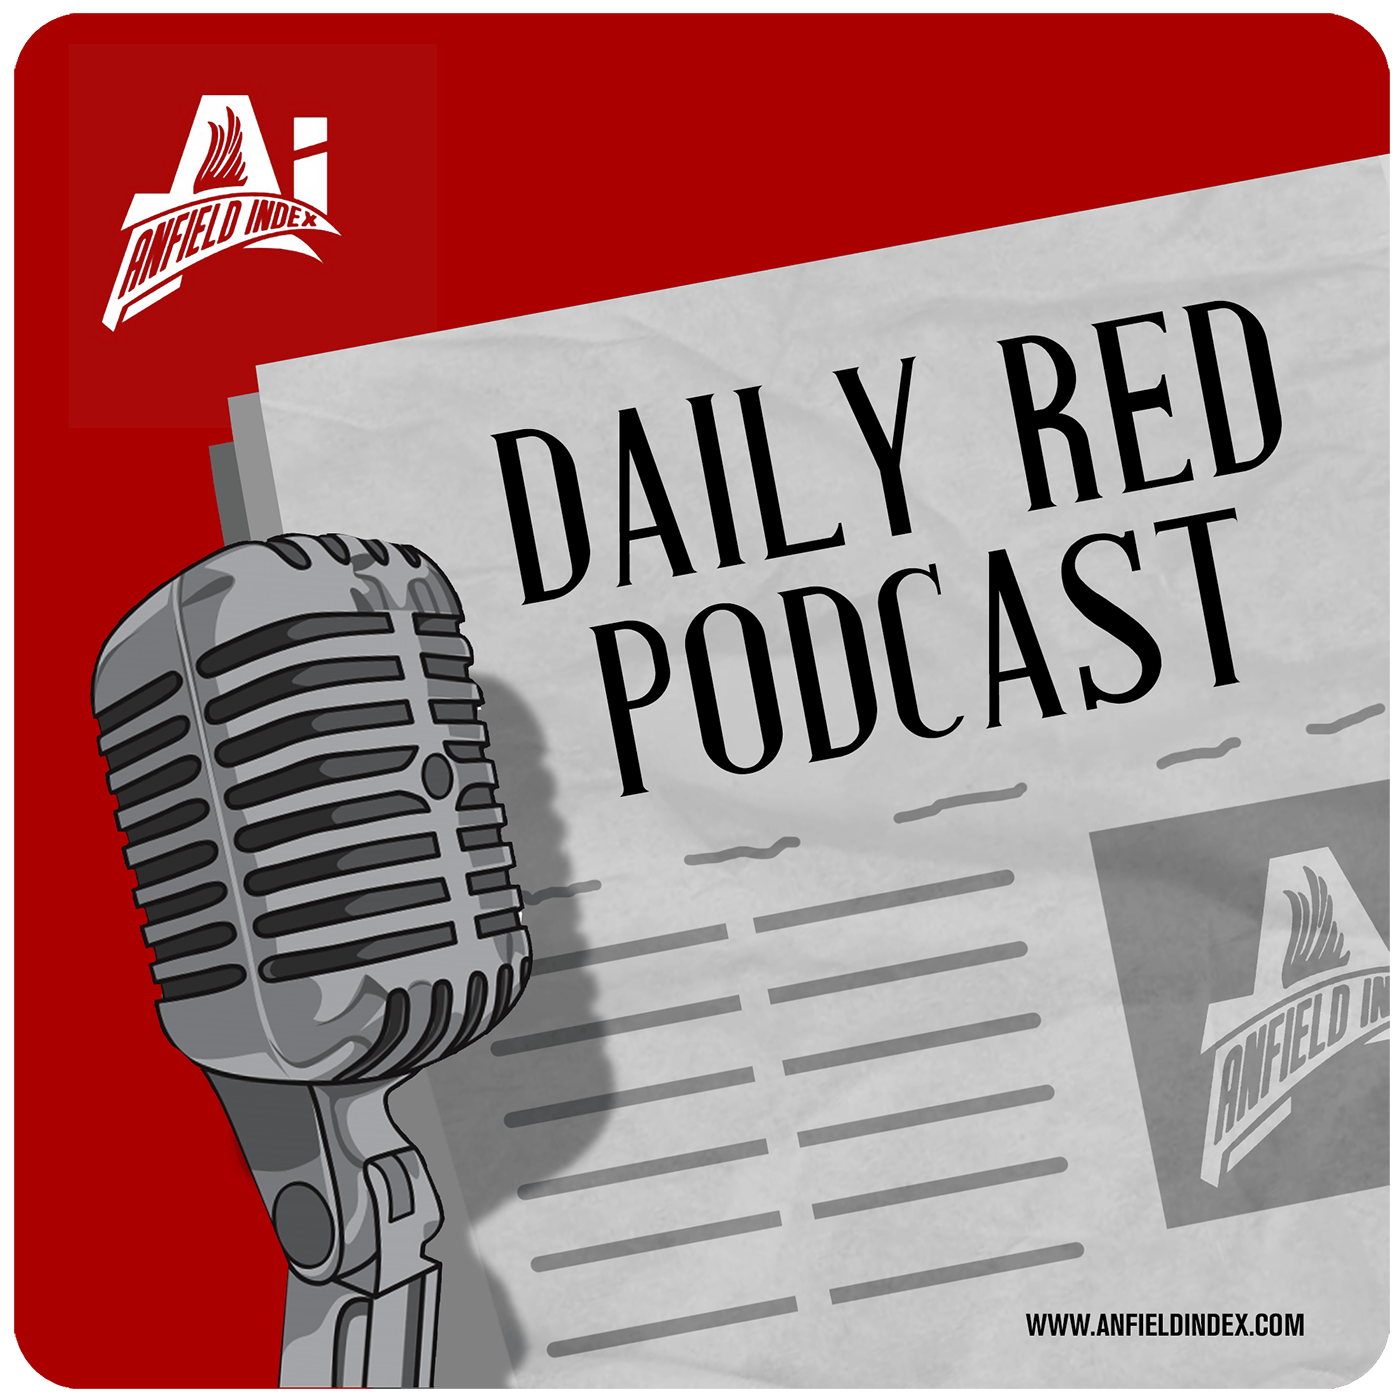 Catching Up - Daily Red Podcast